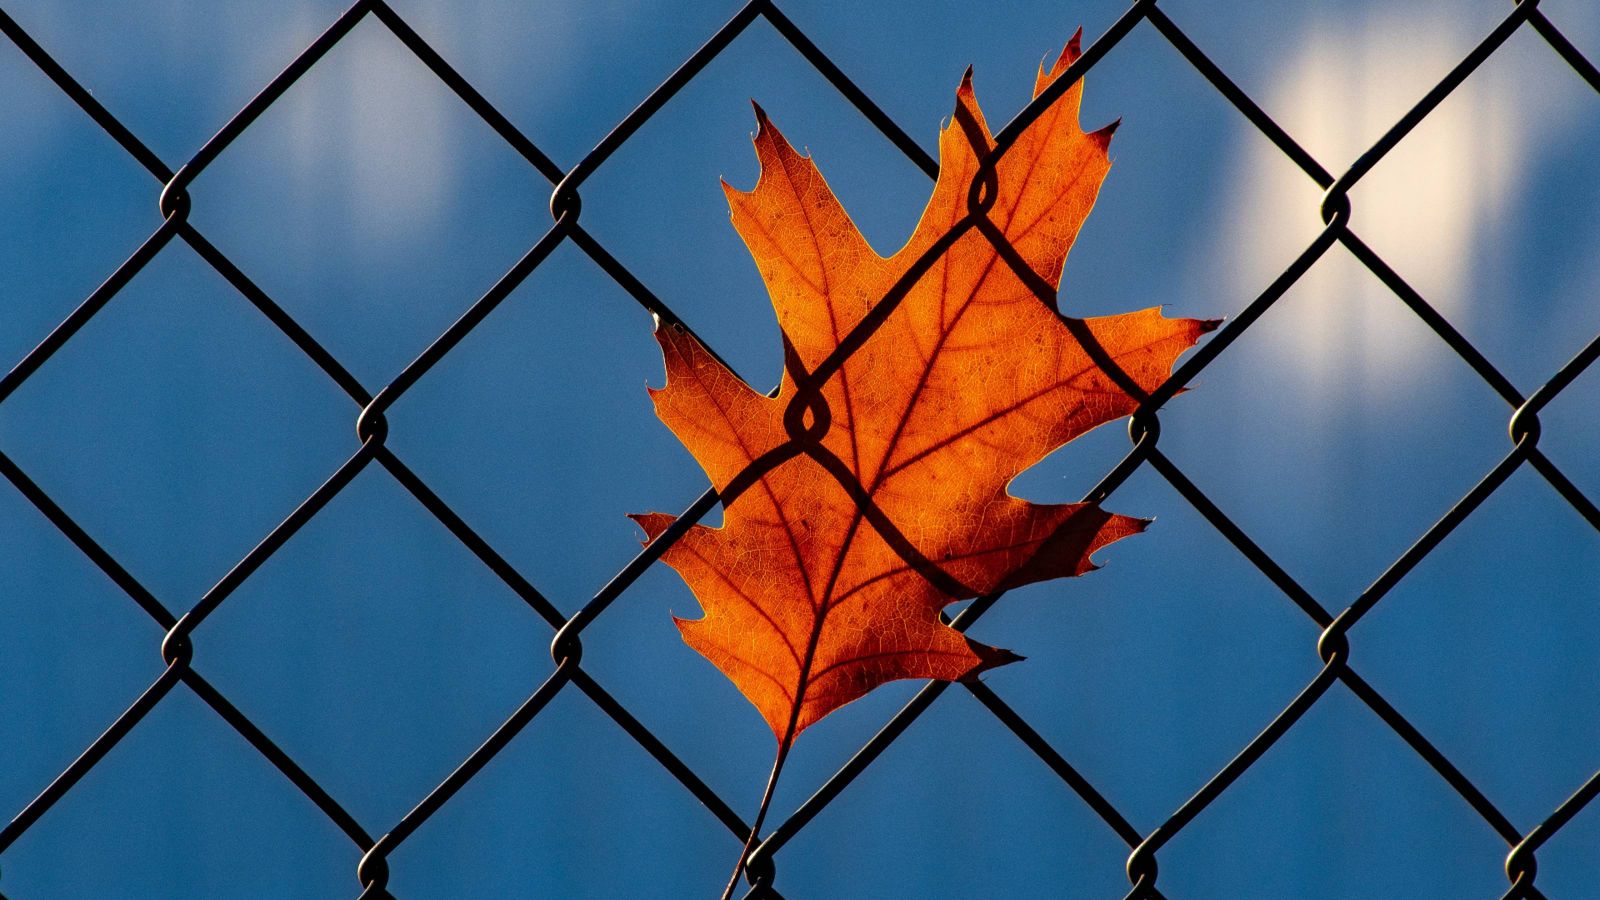 Wire fence with a single leaf on the mesh